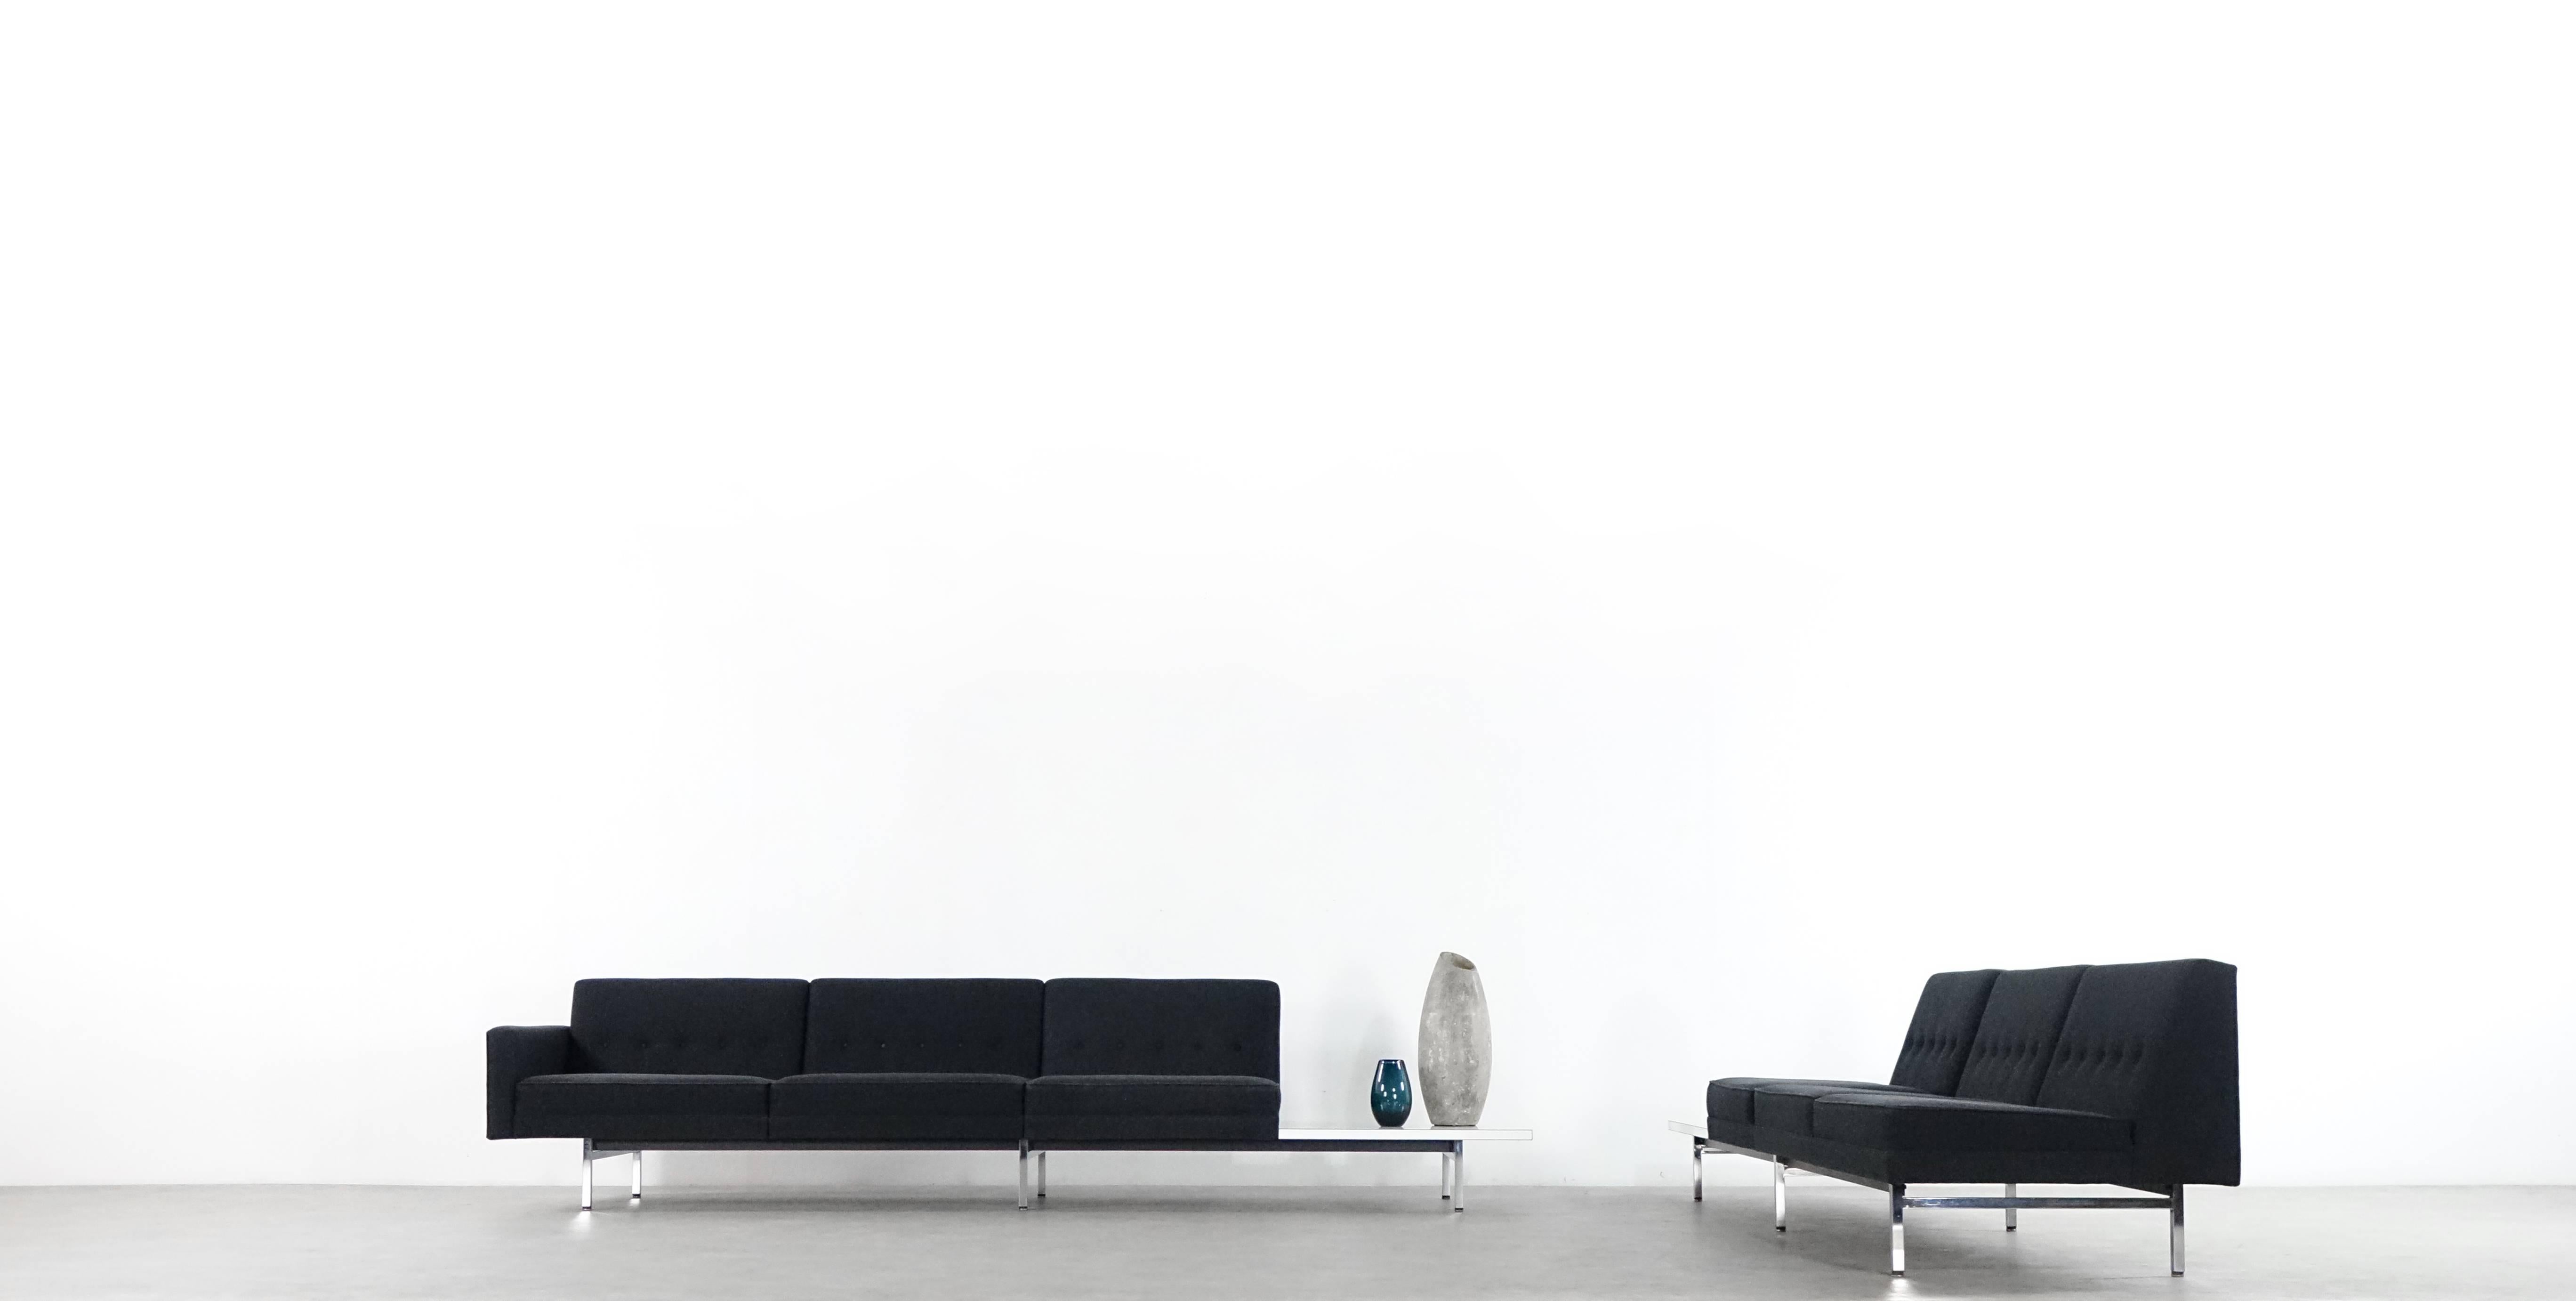 Modular System Seating Suite Sofa by George Nelson for Herman Miller Perfect 3